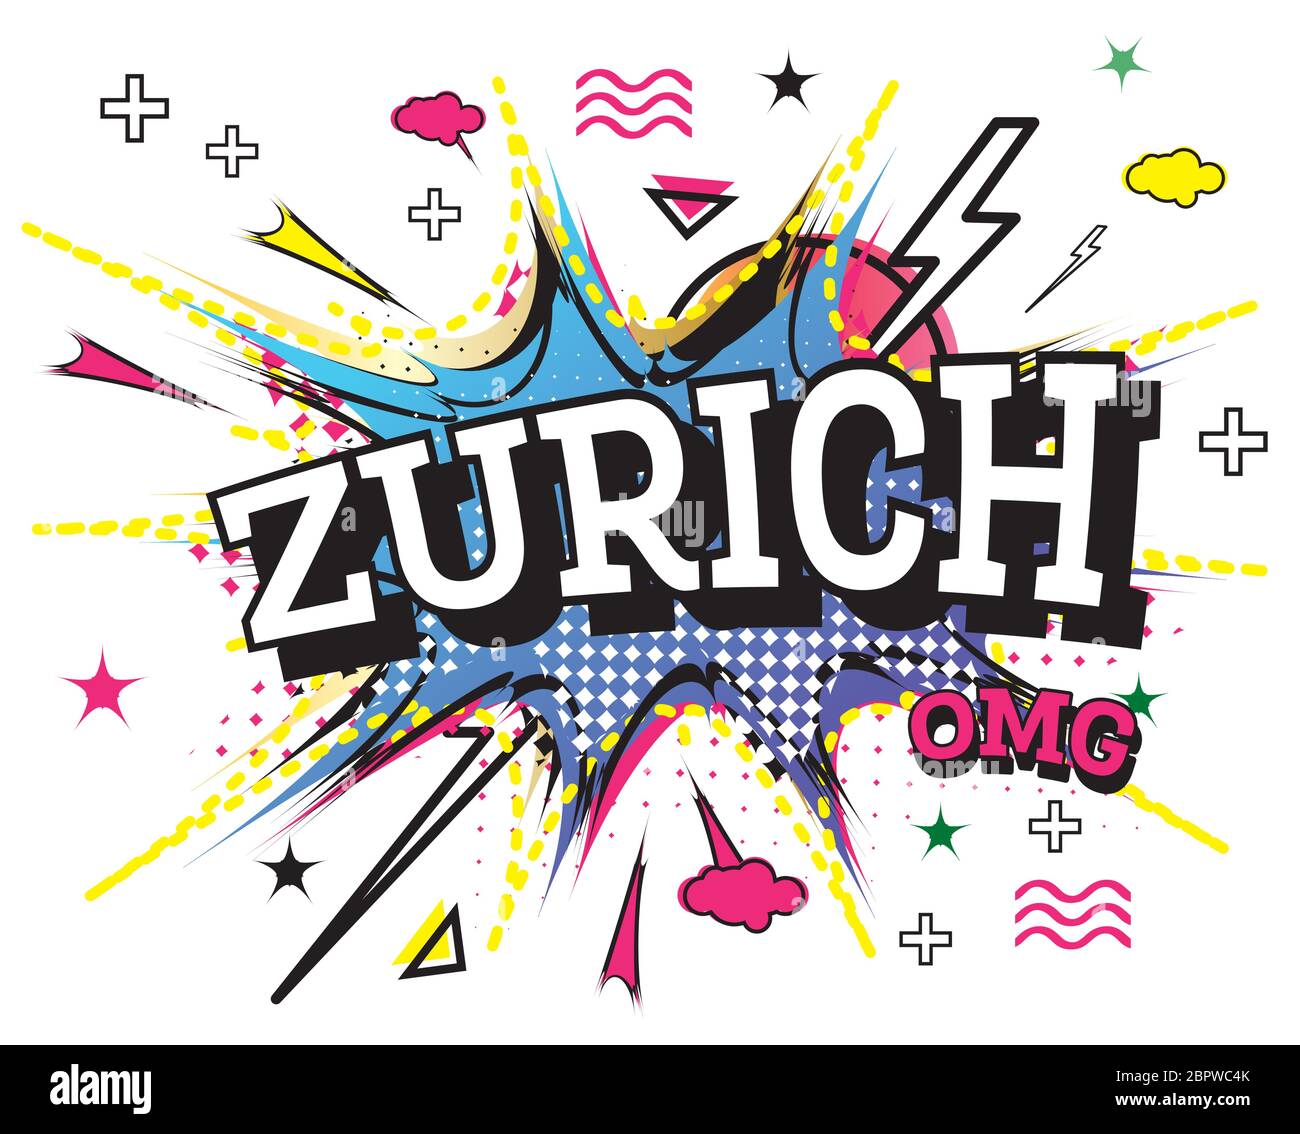 Zurich Comic Text in Pop Art Style Isolated on White Background. Vector Illustration. Stock Vector